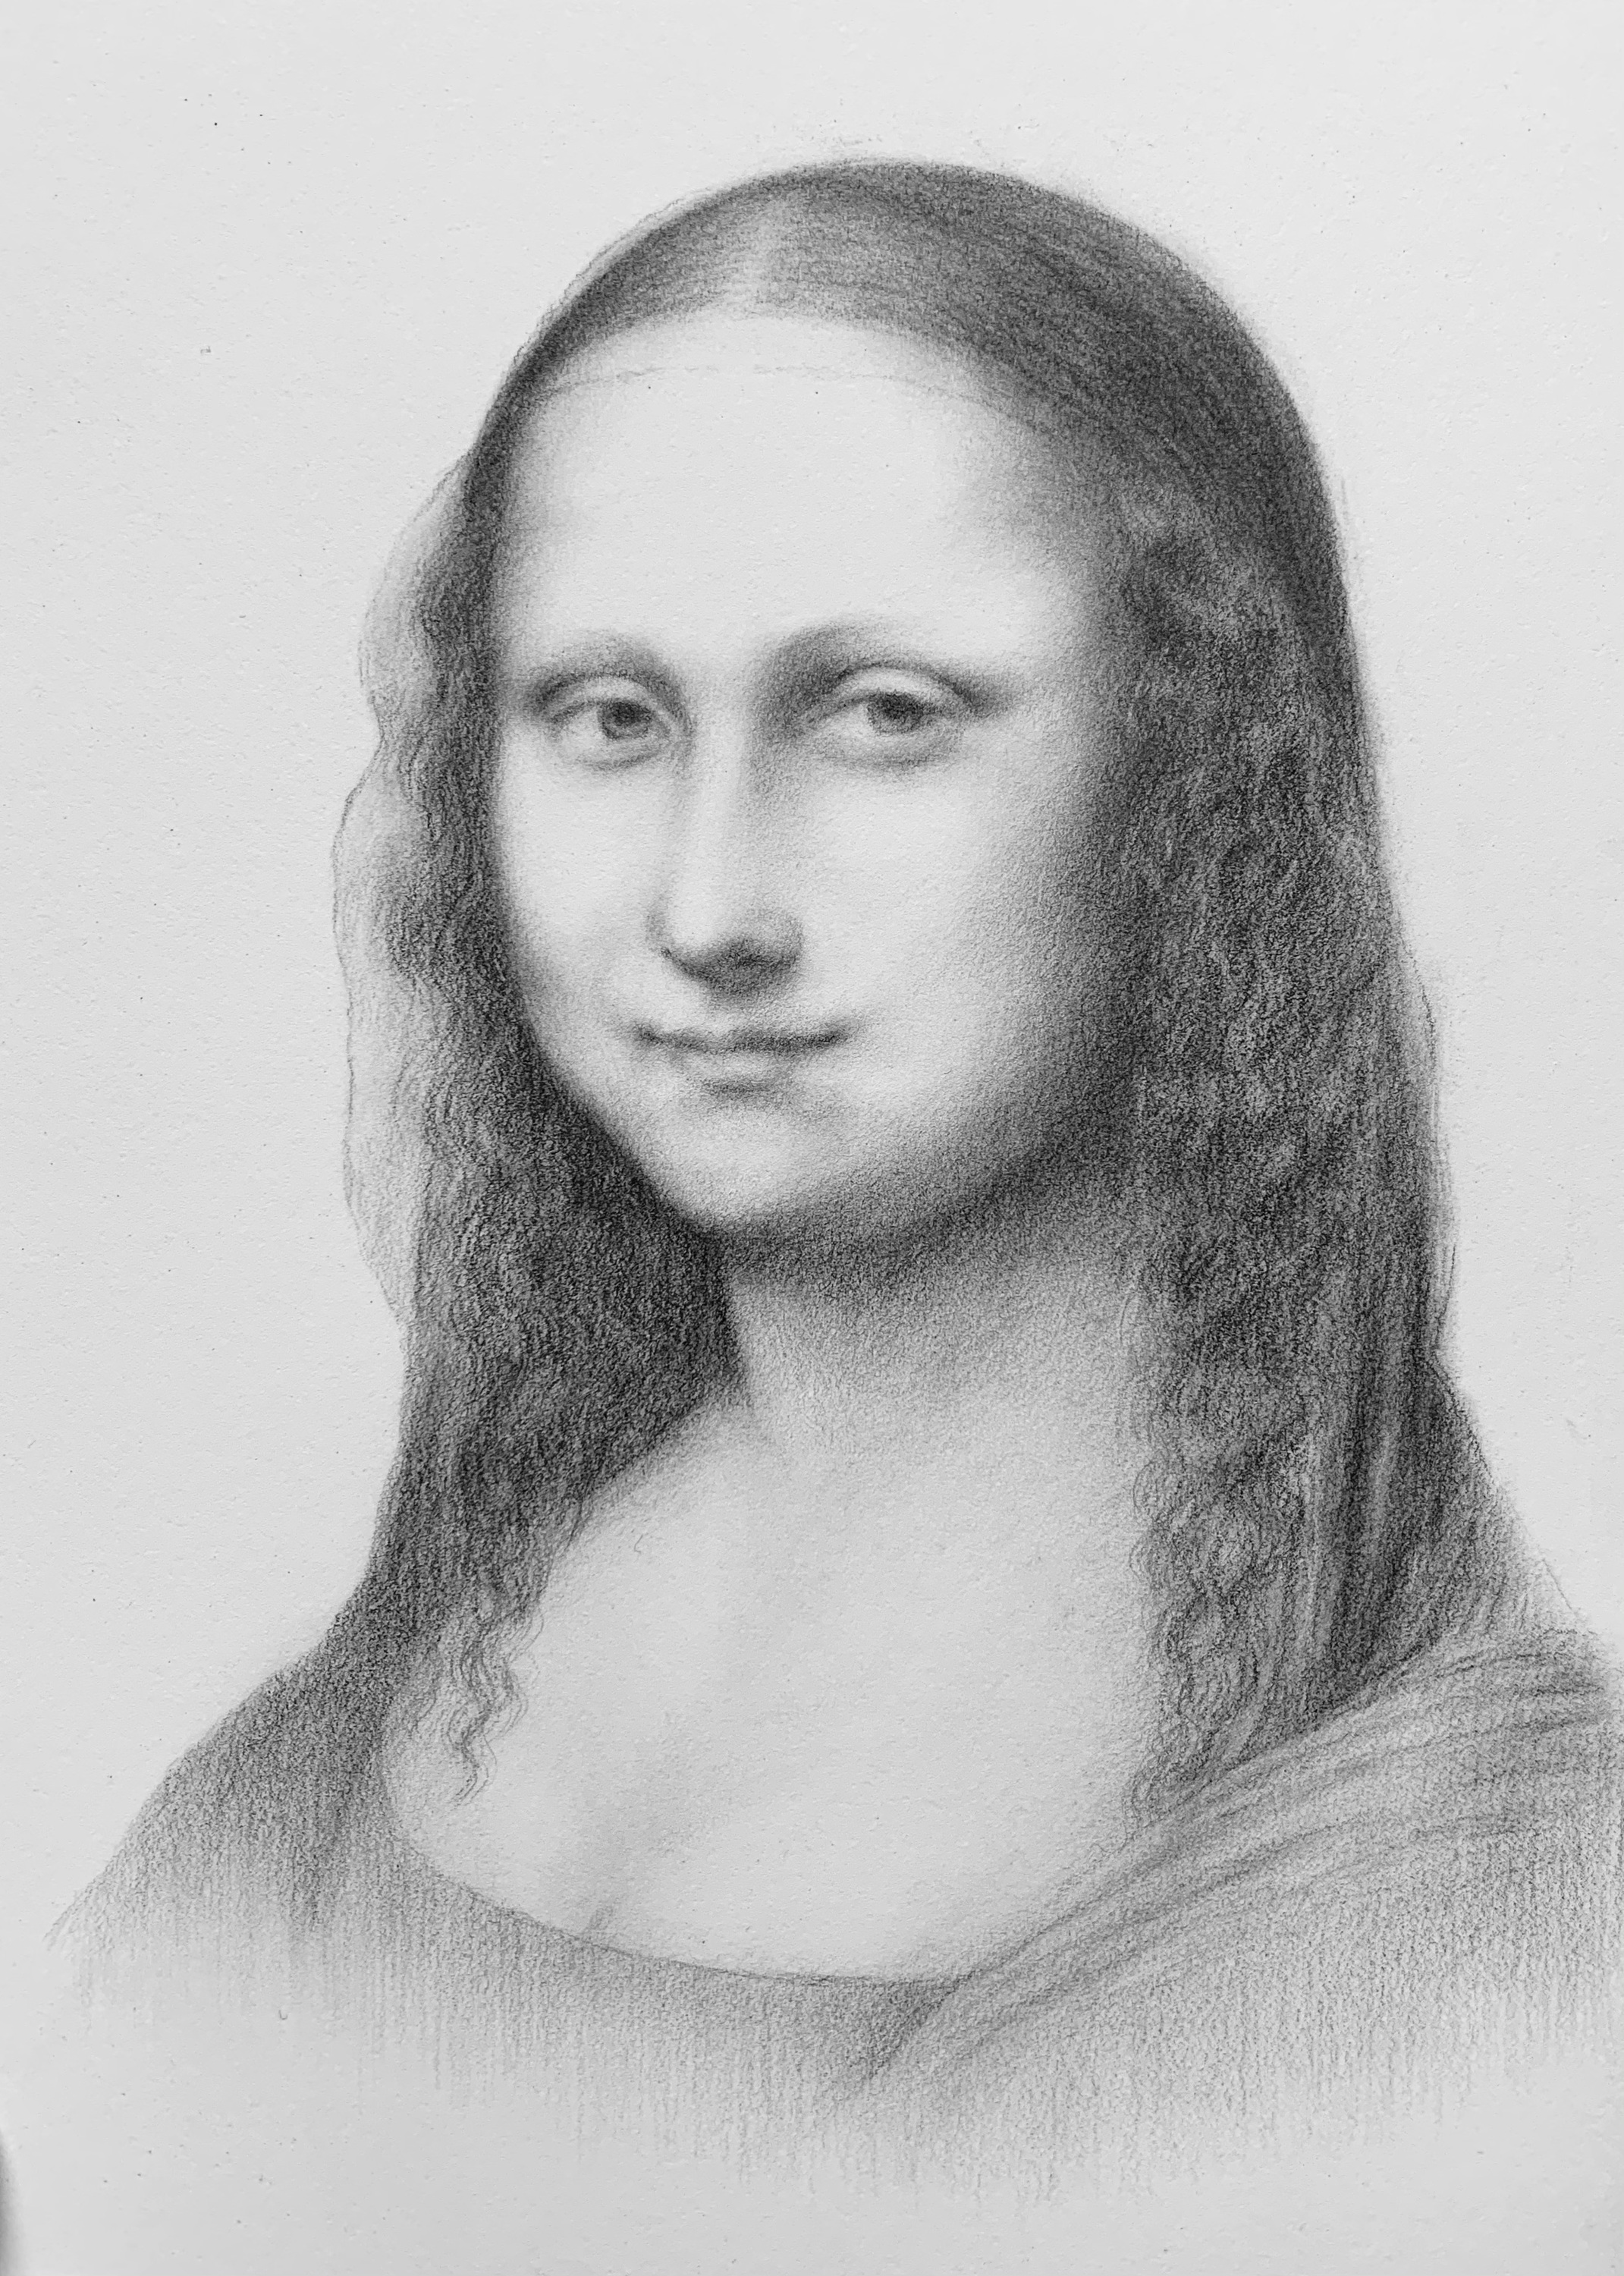 Monalisa | Pencil sketch on drawing paper. | Artsy Firefly | Flickr